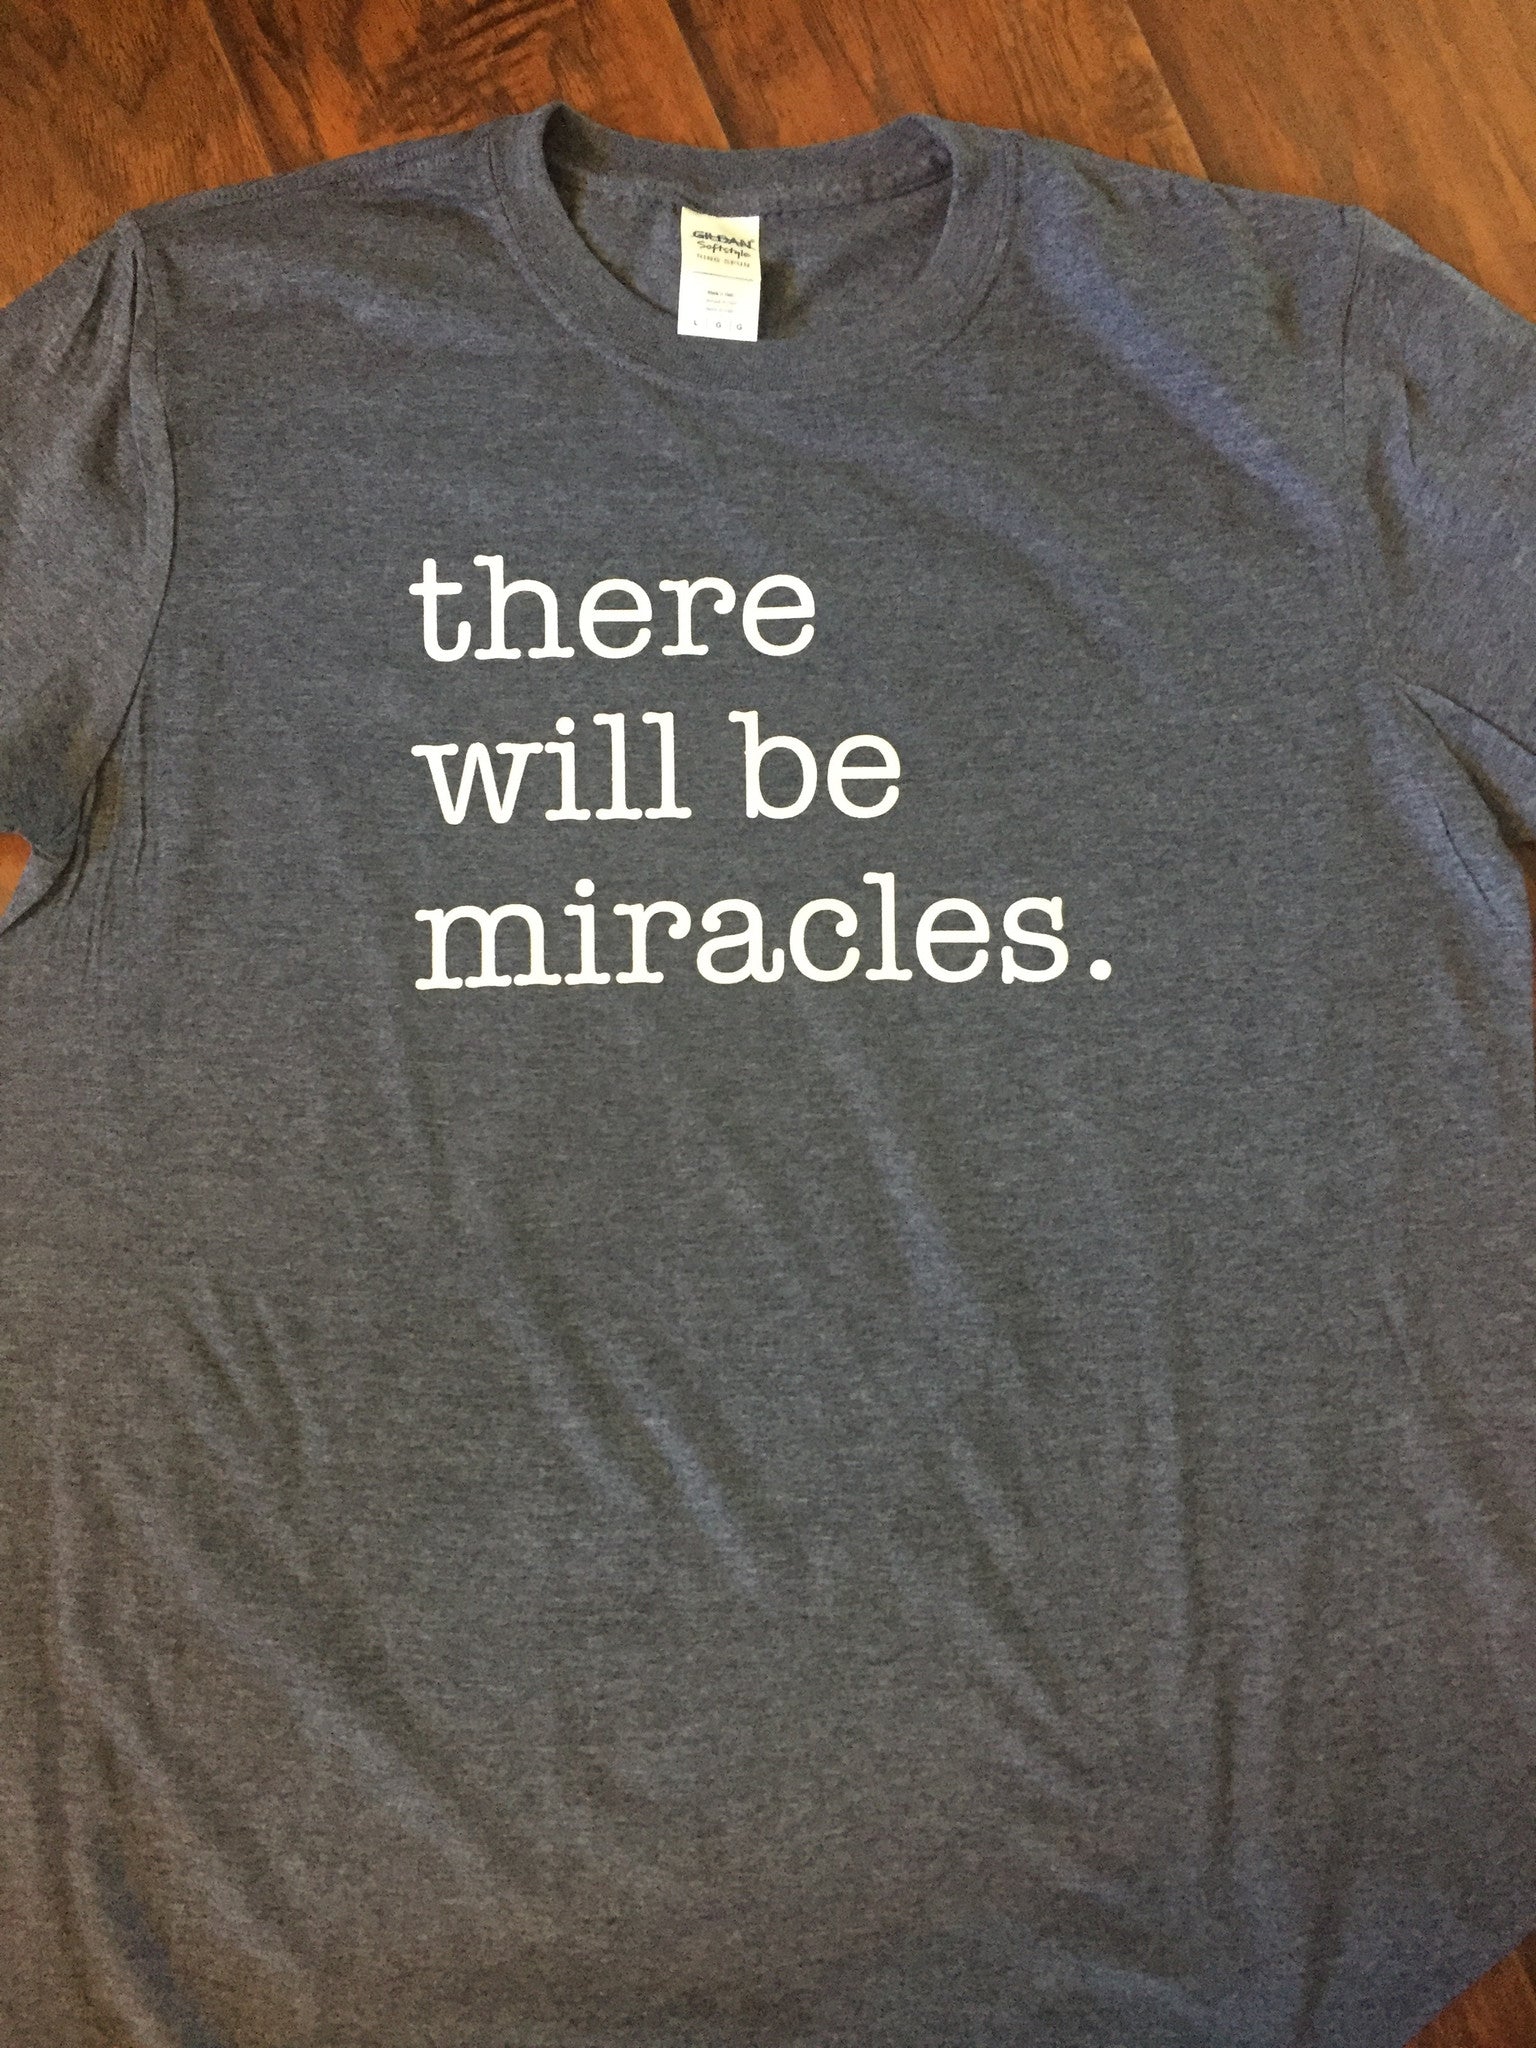 There will be miracles